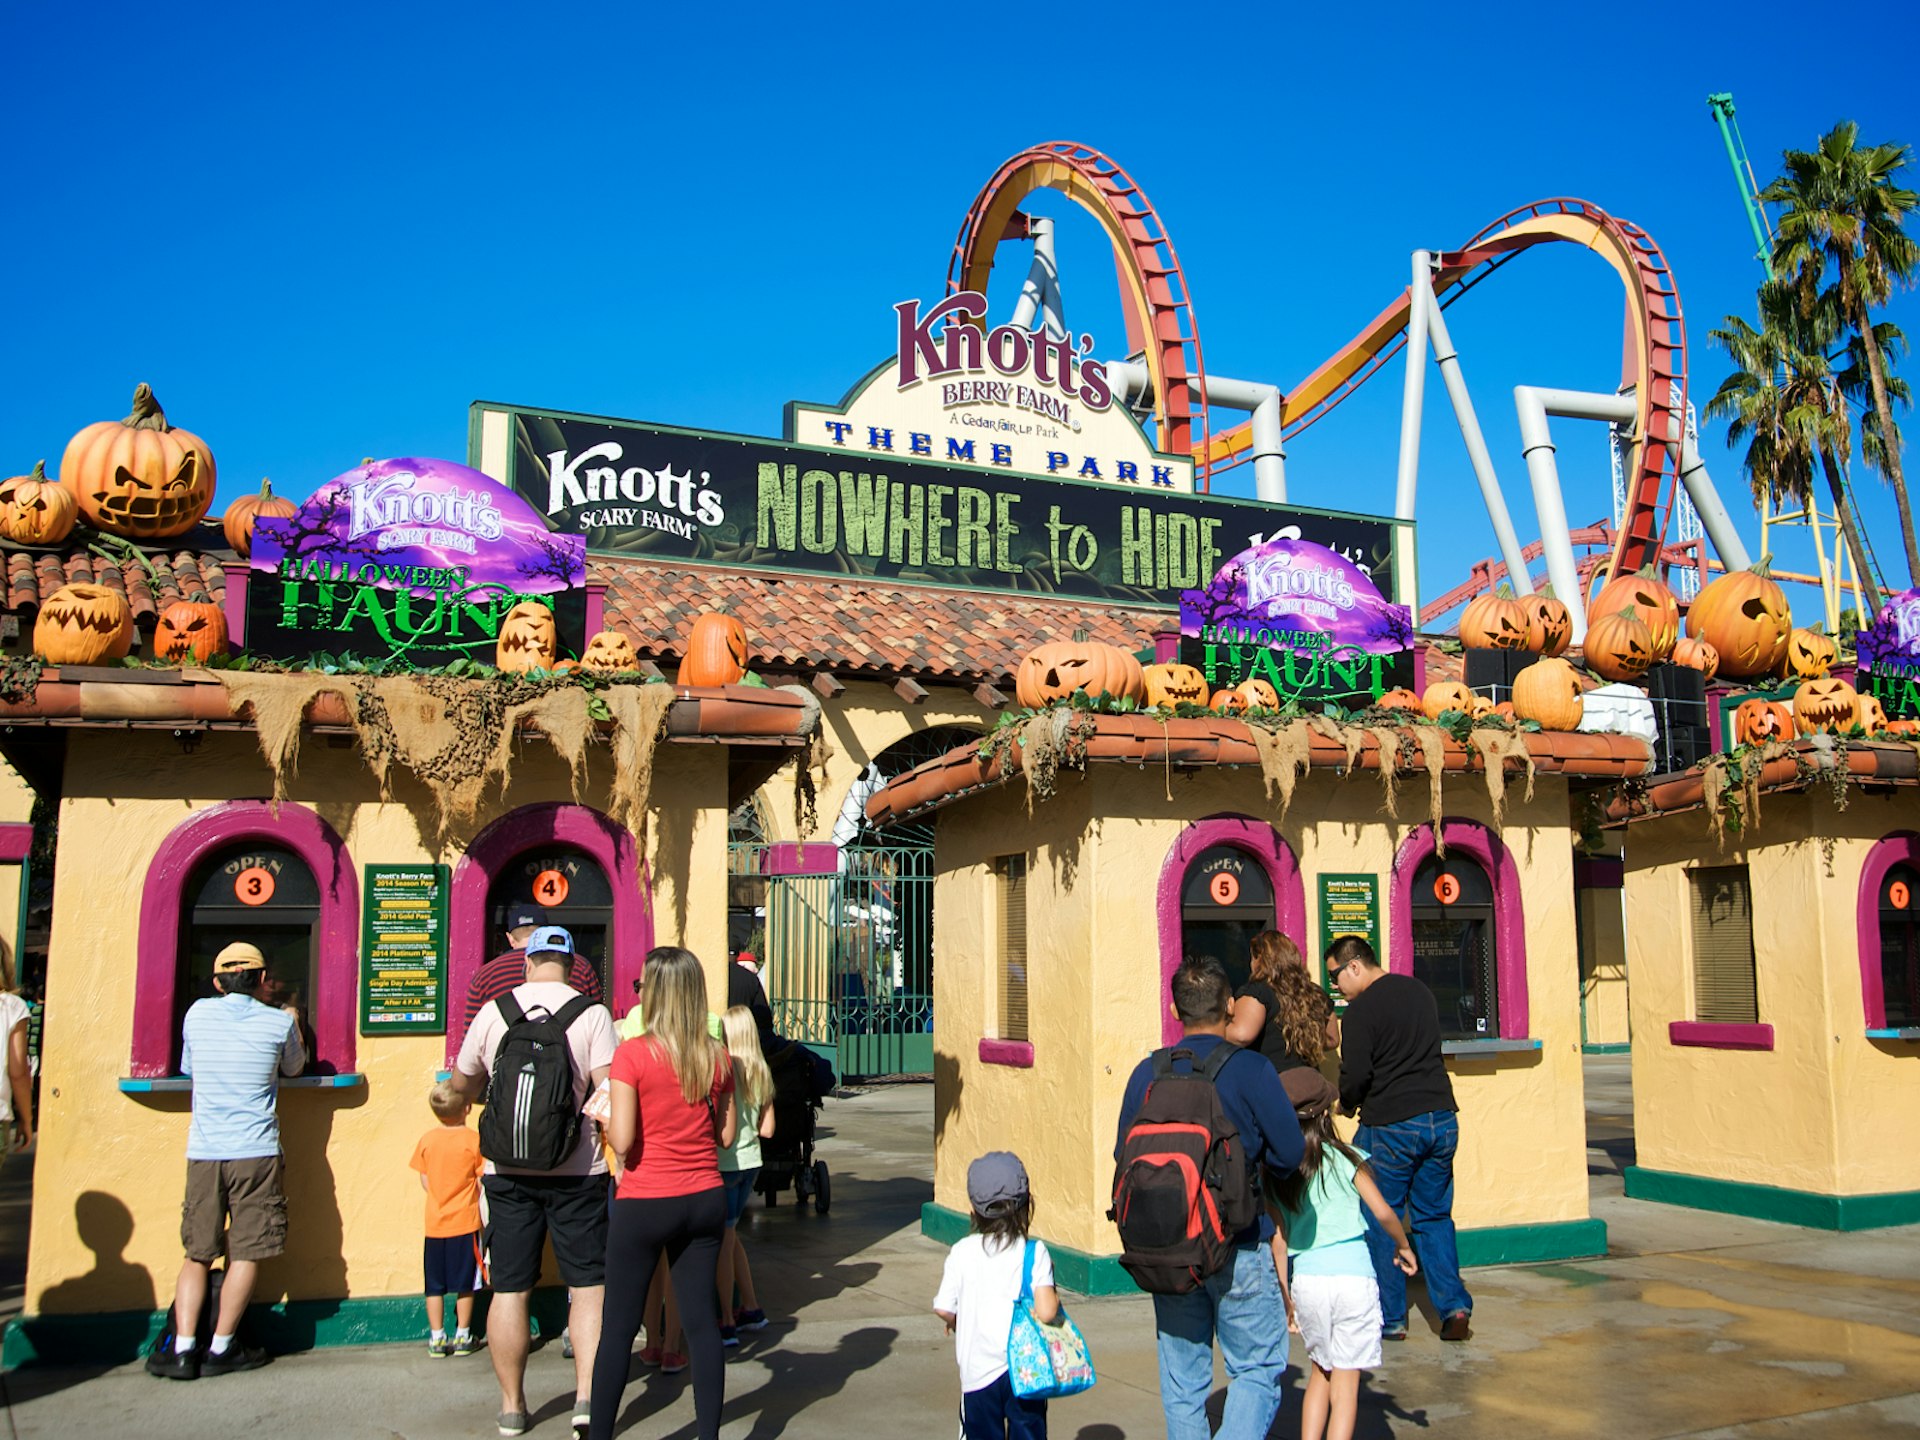 Disney alternatives - Knotts Berry Farm decked out for Halloween with pumpkins engulfing the entrance gates